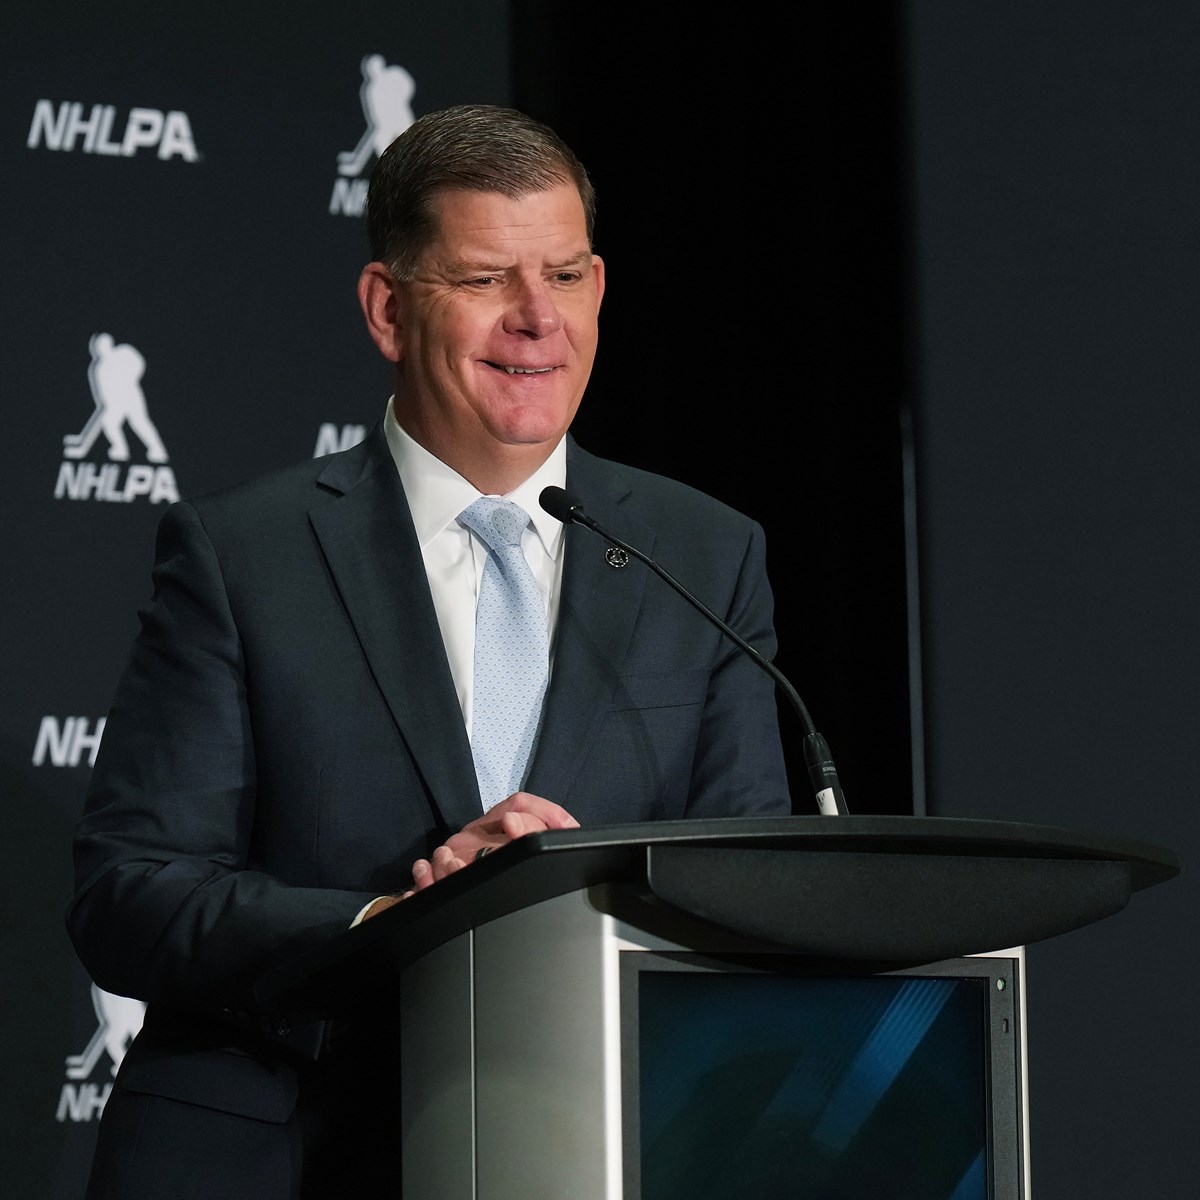 Marty Walsh standing at a podium with a background with letters NHLPA and a silhouette of a hockey player.